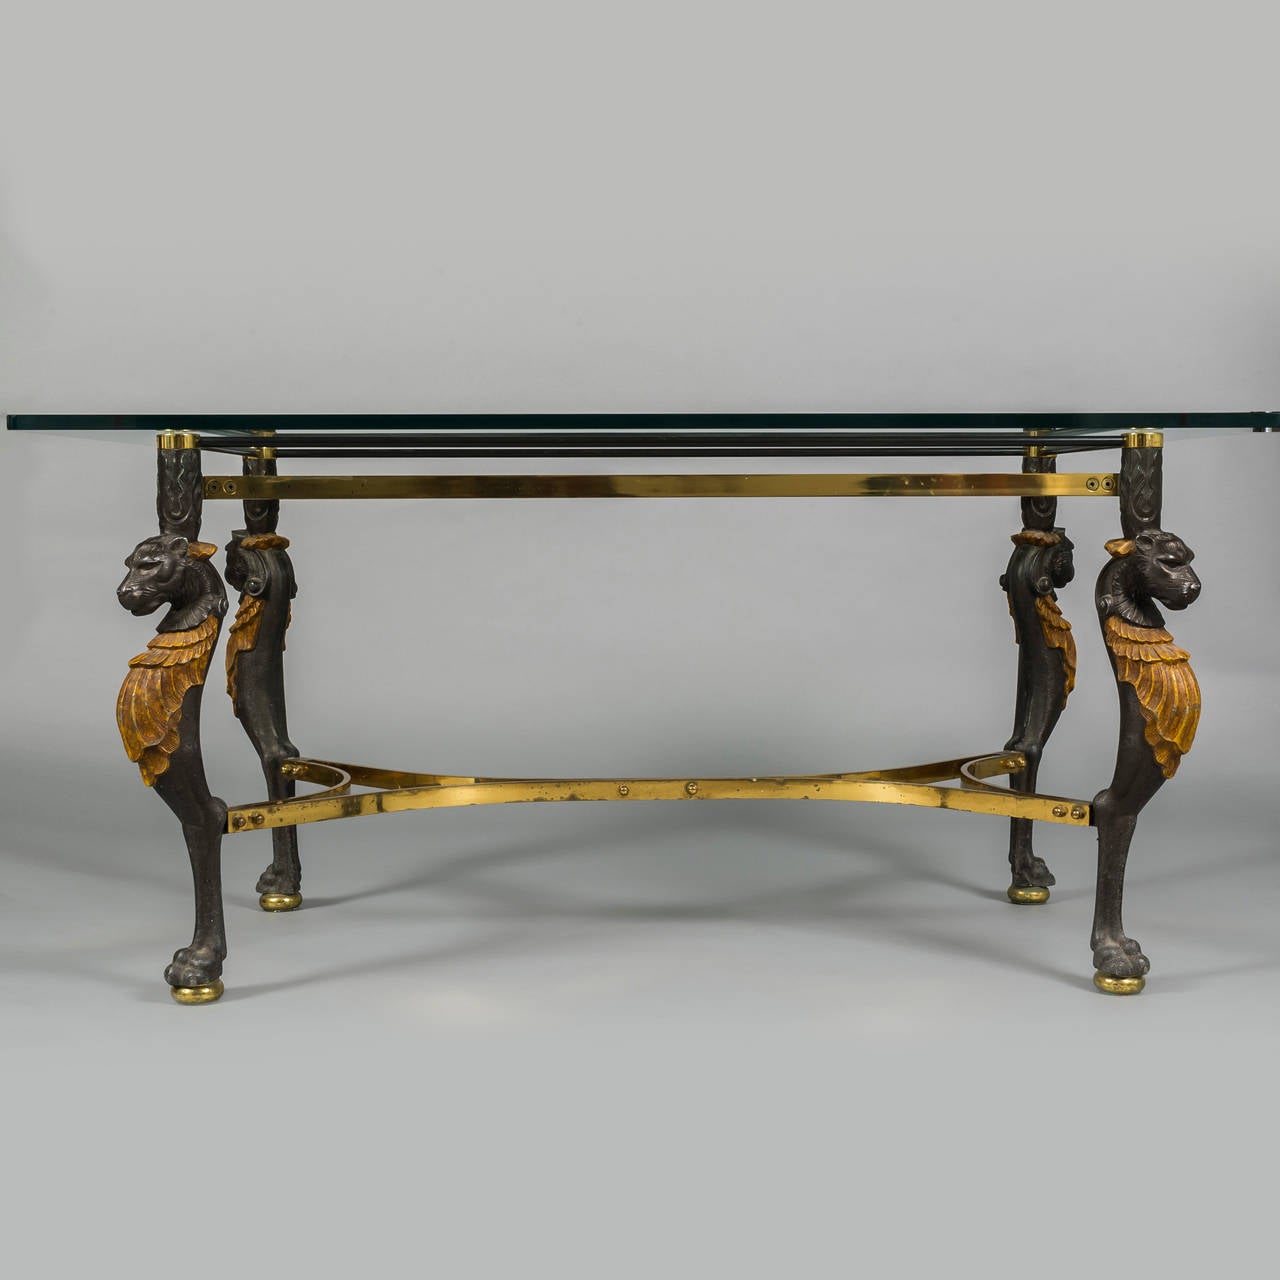 Striking pair of tables with lion motif legs in white metal. Brass details and thick glass tops, French.